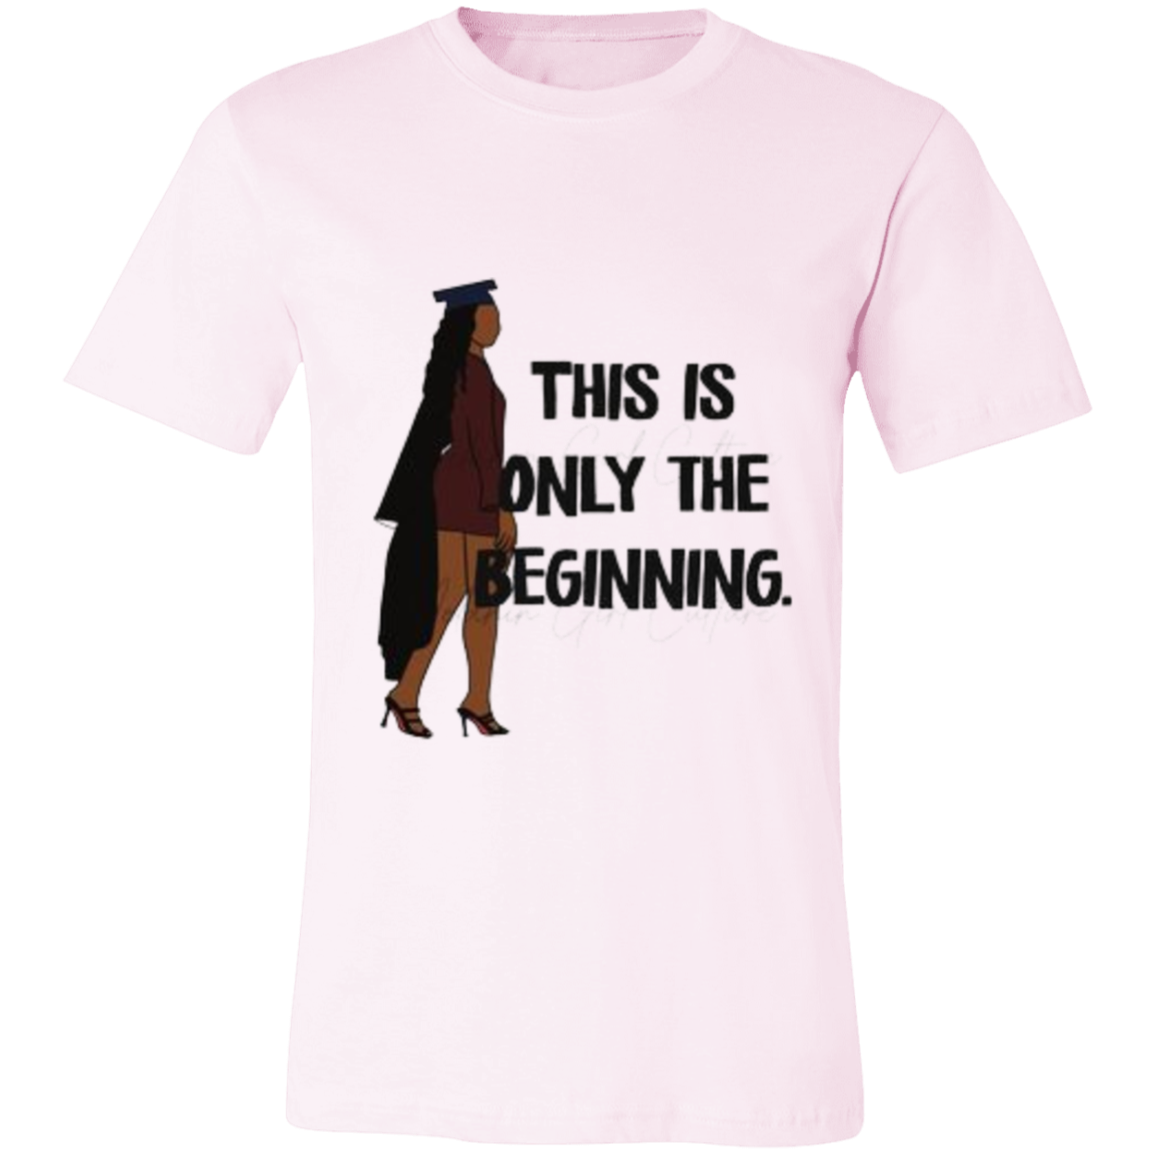 This Is Only the Beginning Jersey Short-Sleeve T-Shirt